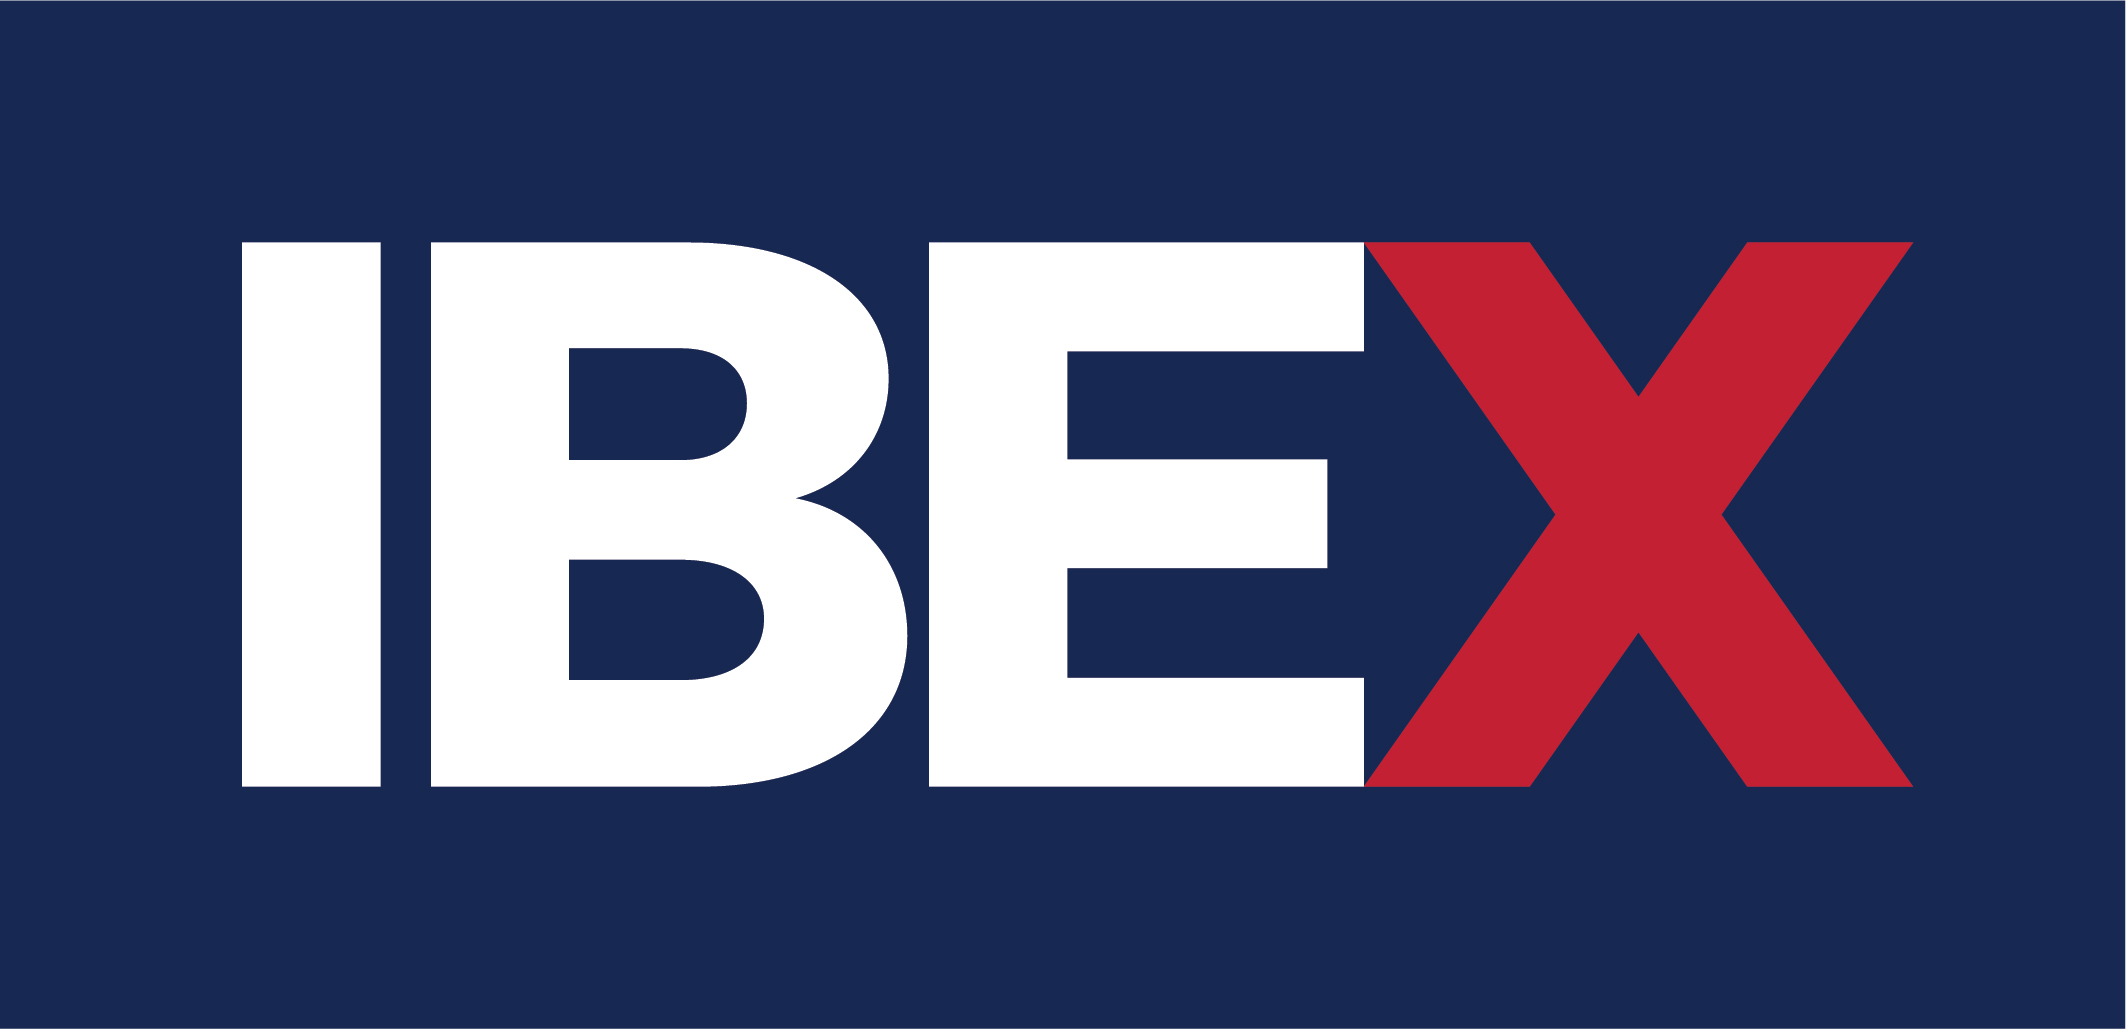 IBEX IT Business Experts